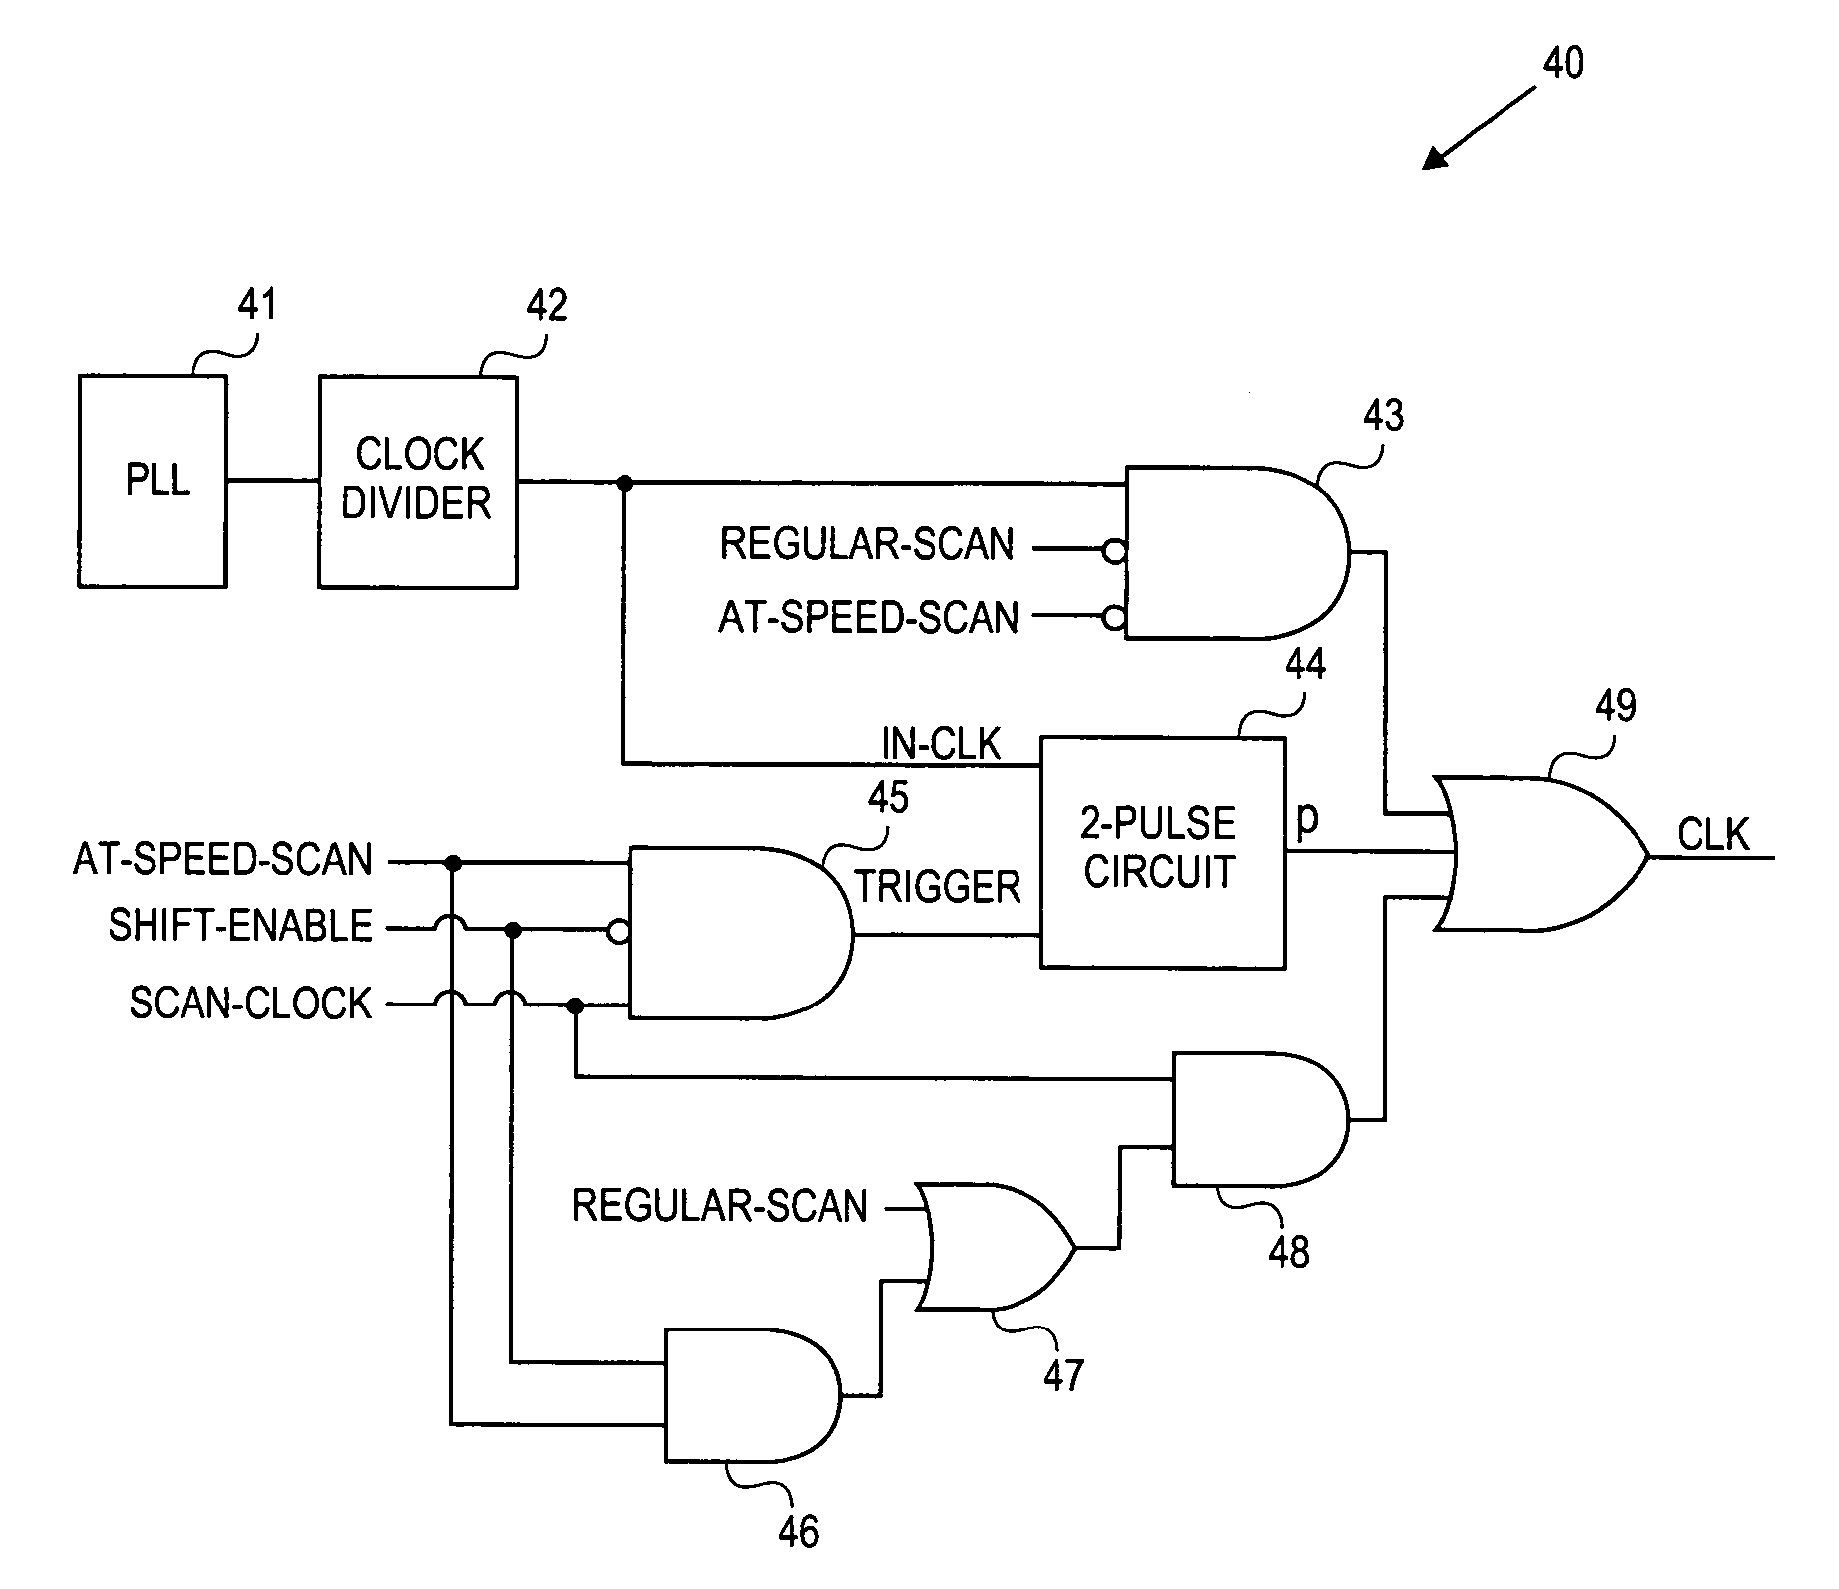 Circuit for PLL-based at-speed scan testing